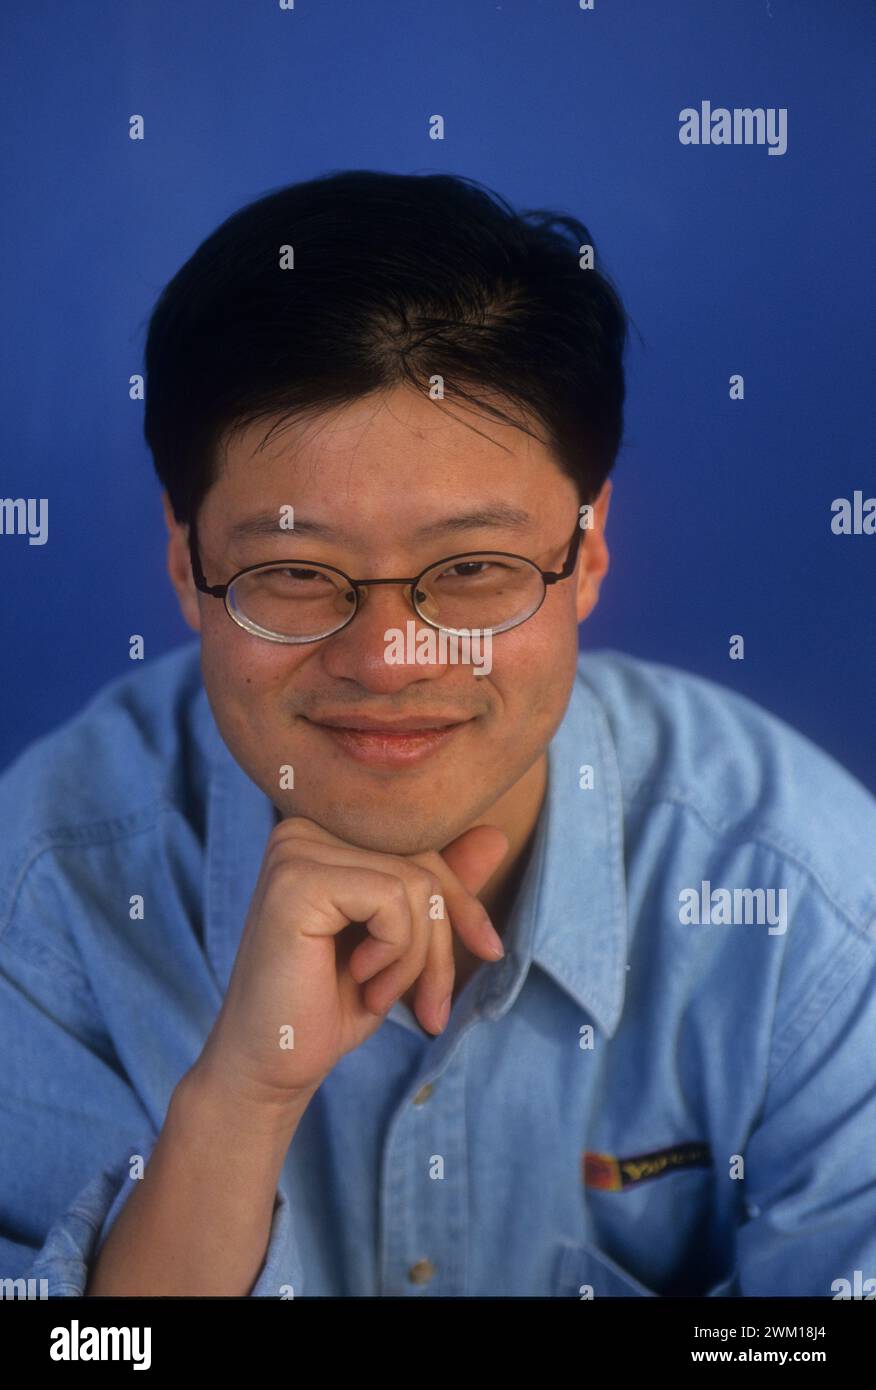 3833106 Jerry Yang; (add.info.: Milan 1998, Jerry Yang, founder and CEO of the Internet search engine Yahoo / Mialno, 1998. Jerry Yang, fondatore e CEO del motore di ricerca Yahoo); © Marcello Mencarini. All rights reserved 2024. Stock Photo